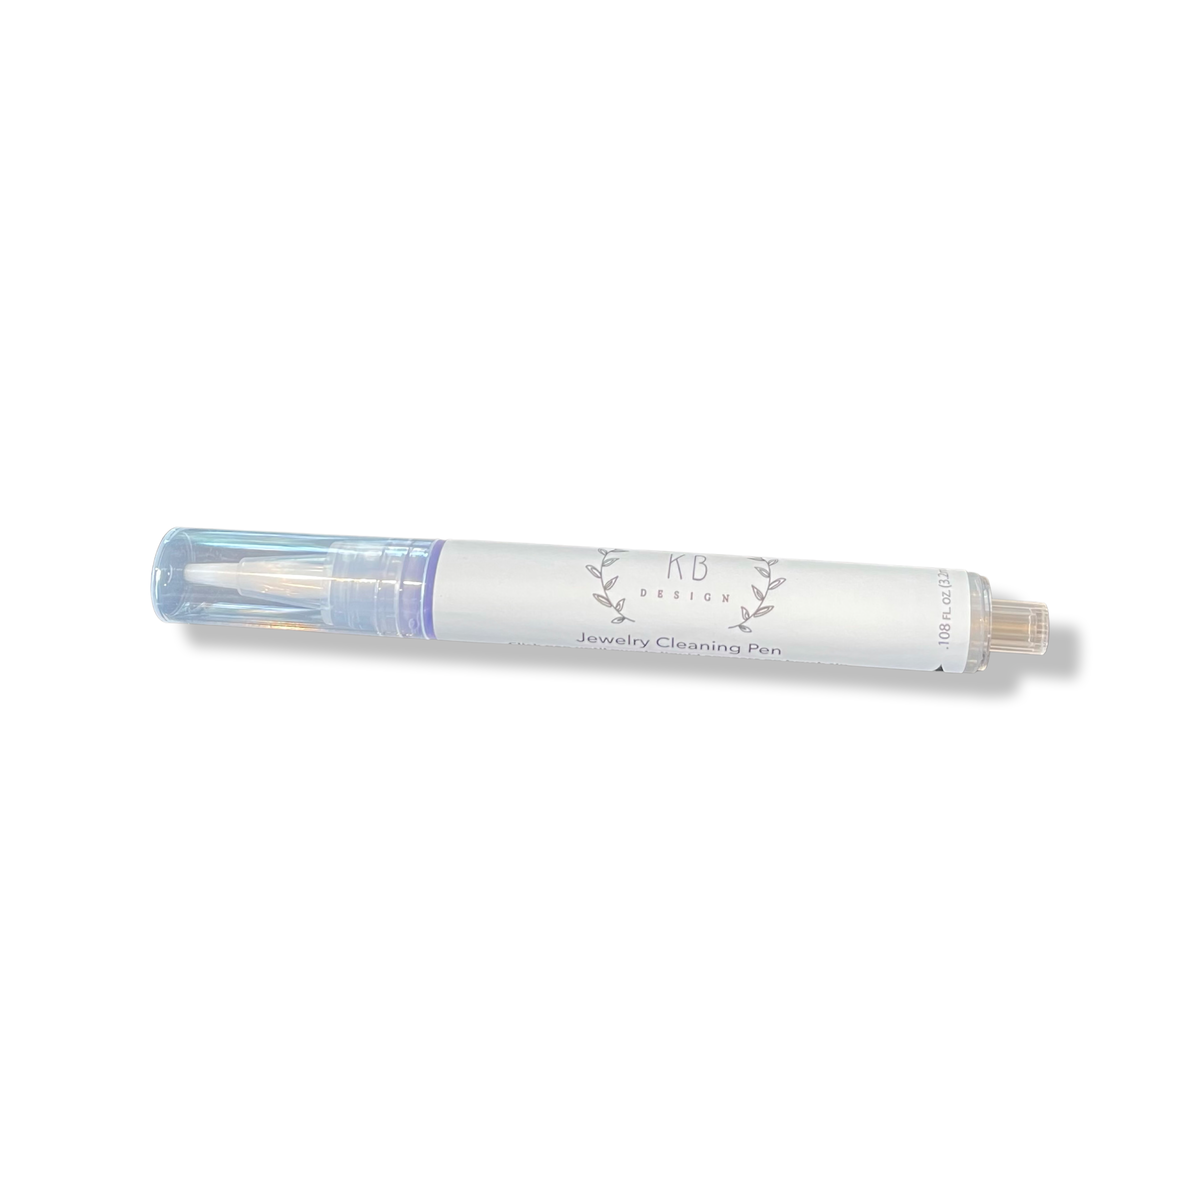 Jewelry Cleaning Pen